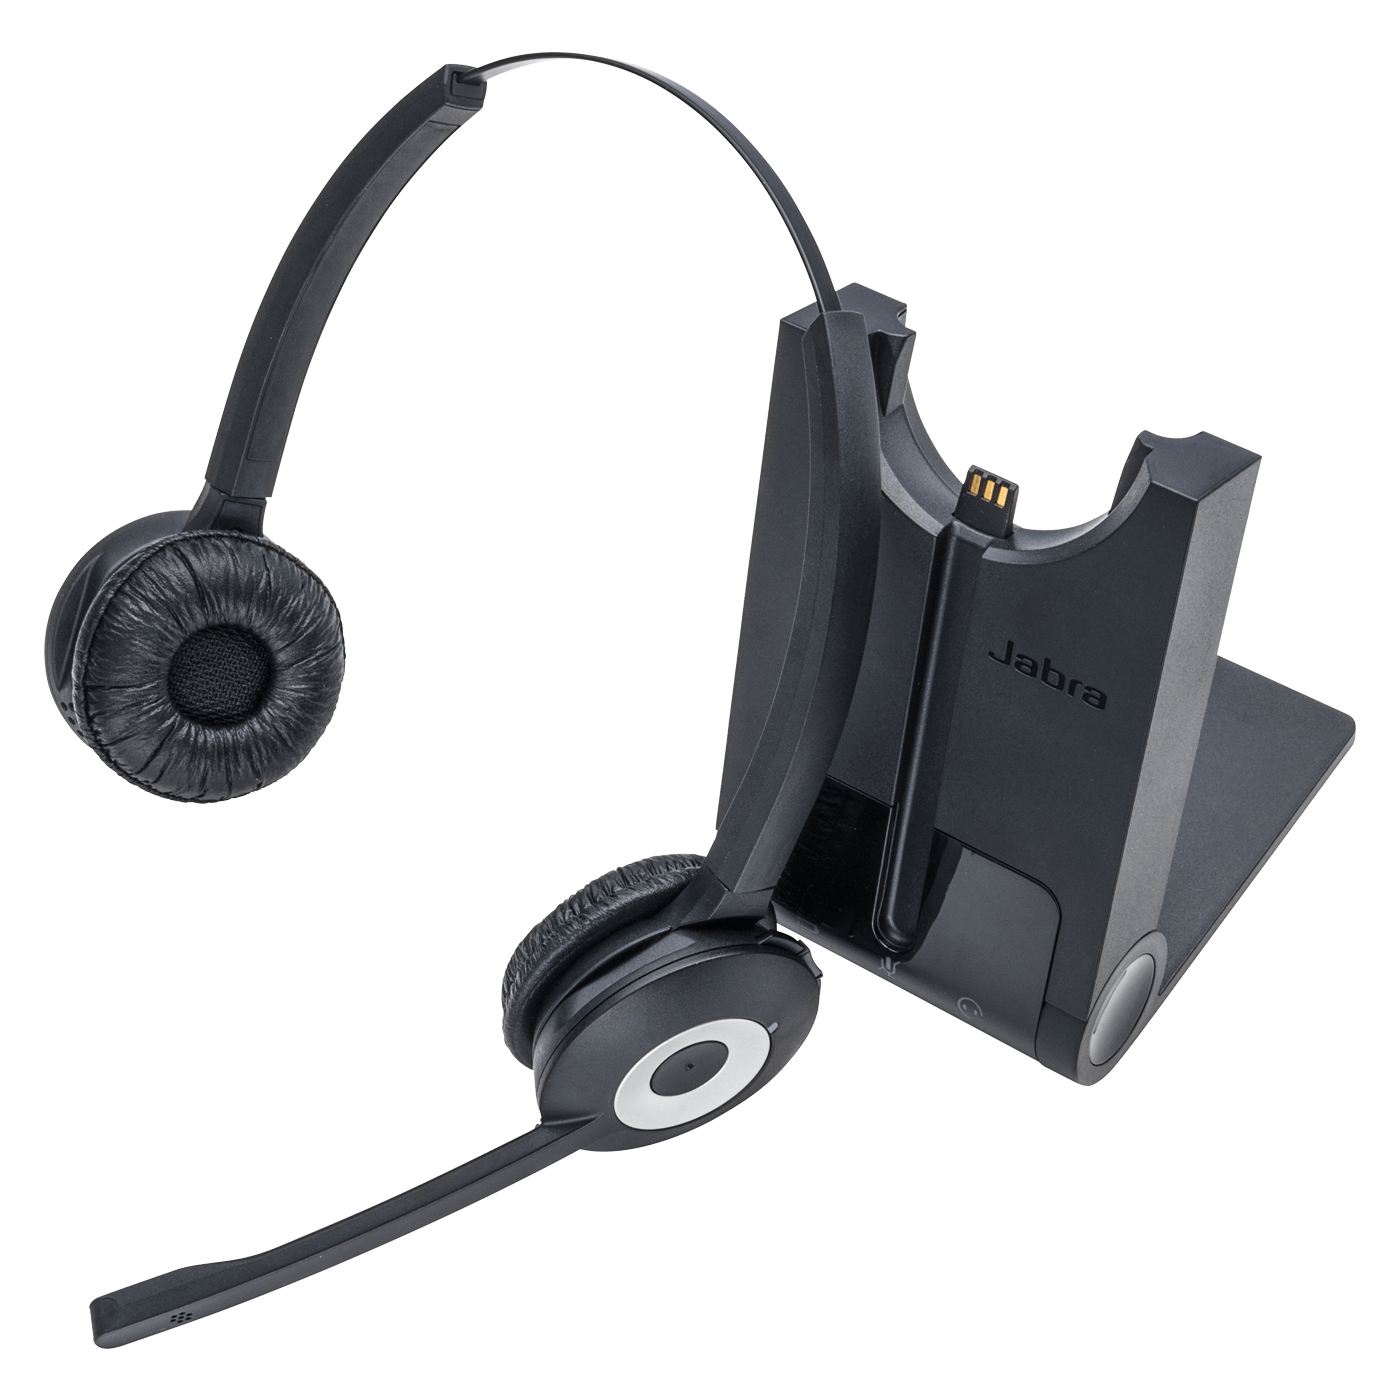 GN Jabra 920 Pro headset stereo noise cancelling